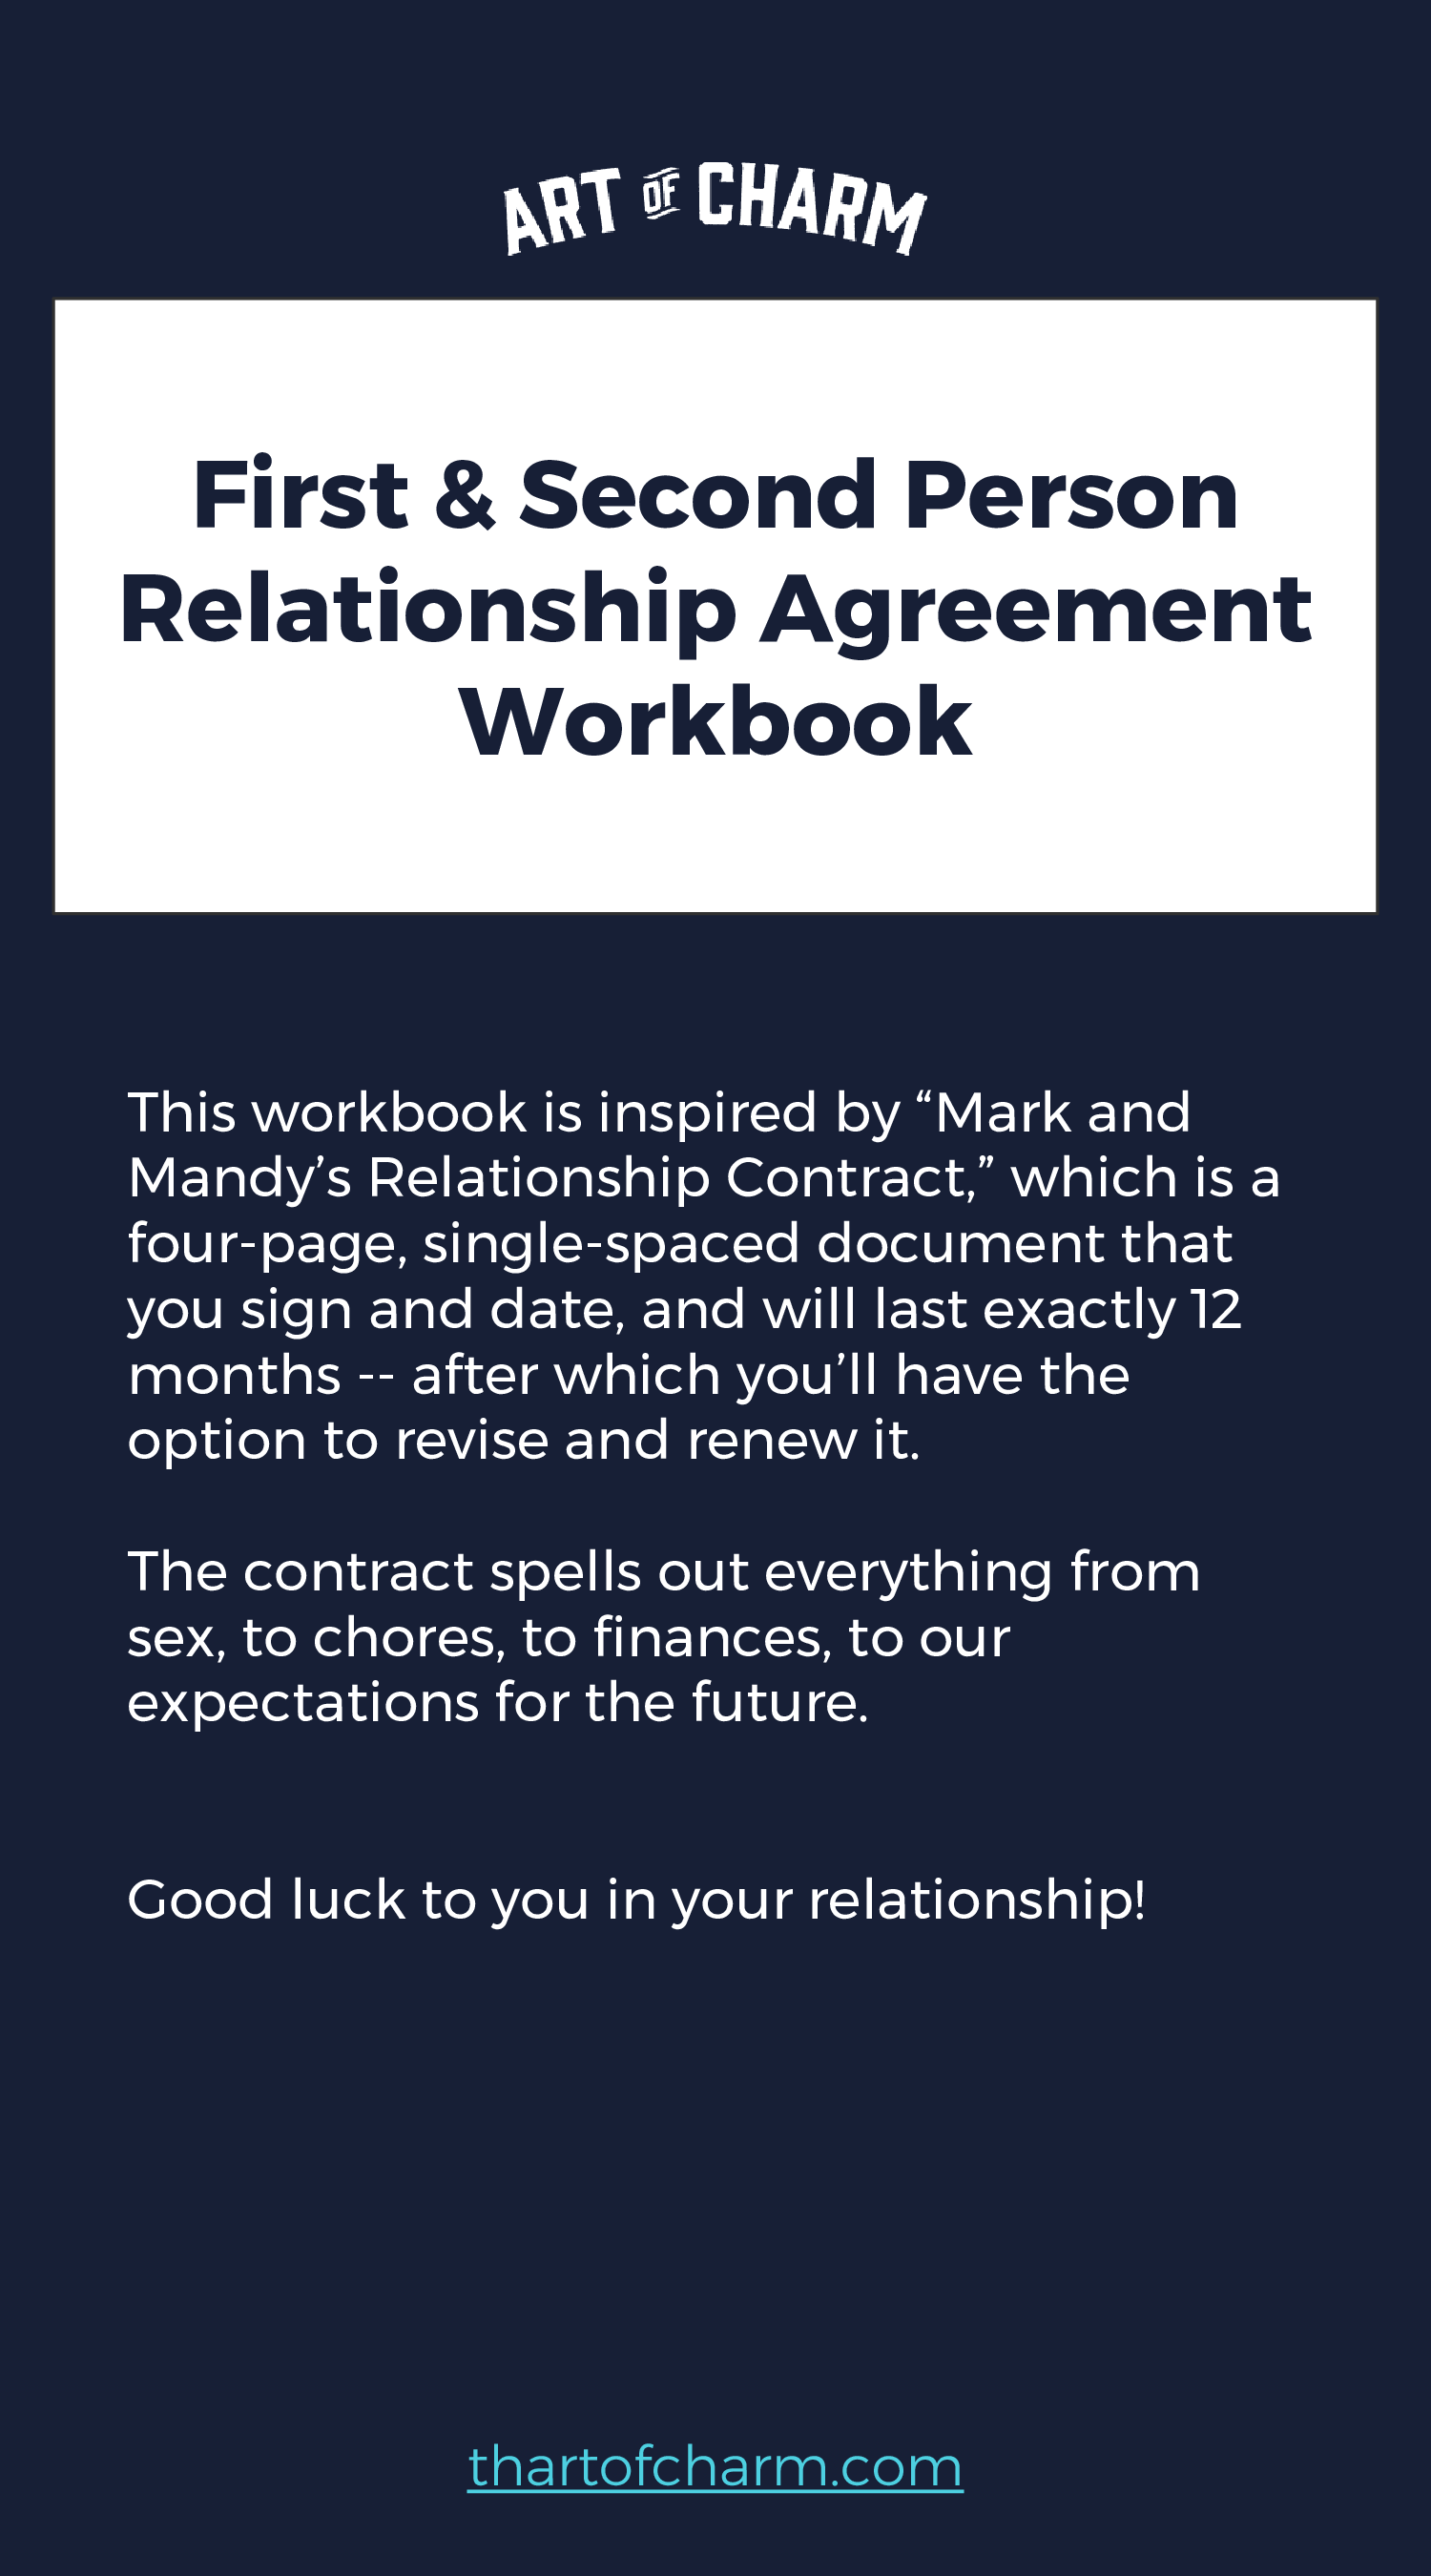 Relationship Contract Agreement Tutorial main image